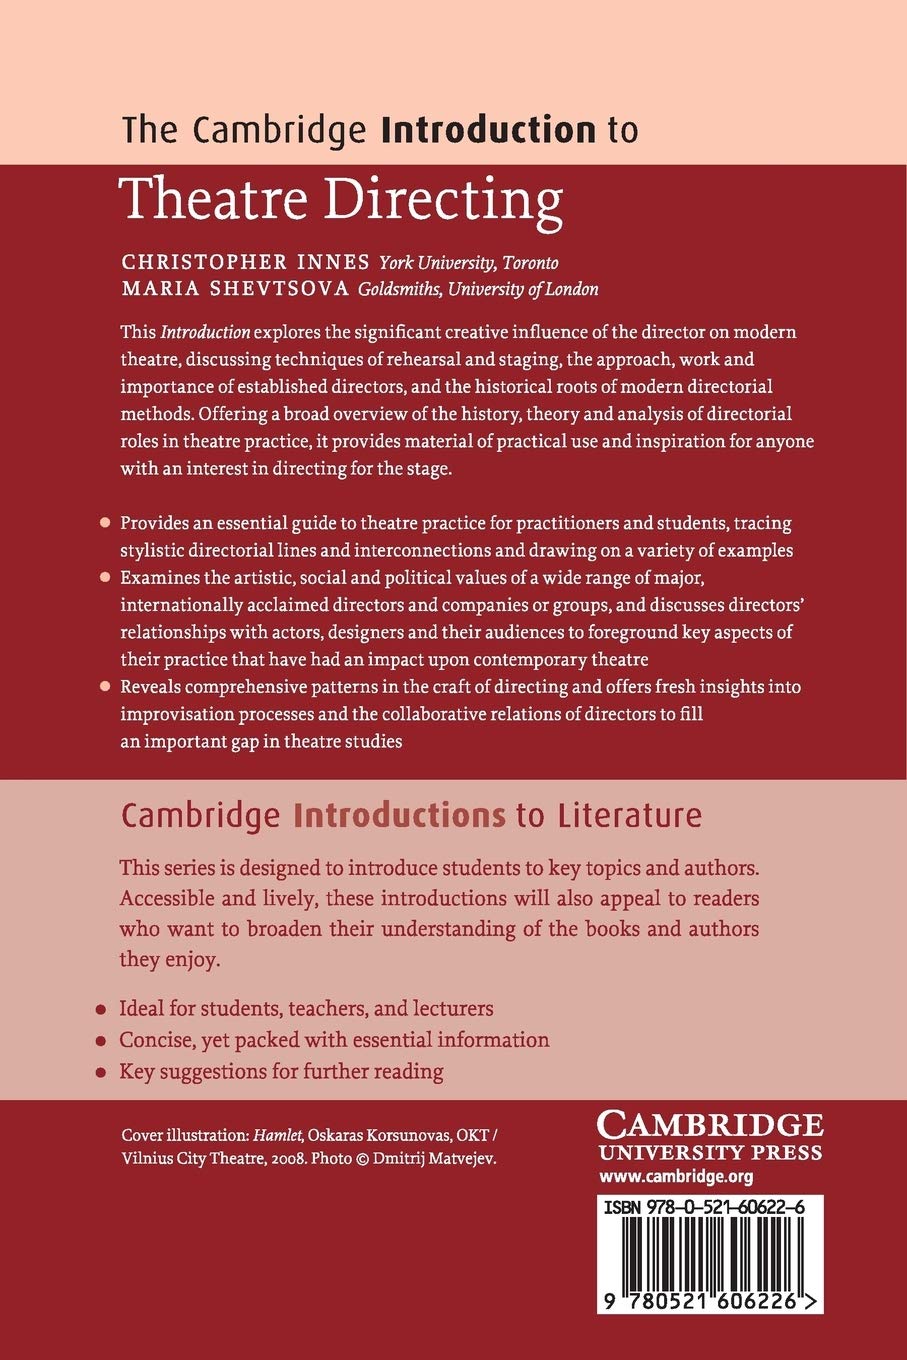 The Cambridge Introduction to Theatre Directing | Christopher Innes, Maria Shevtsova